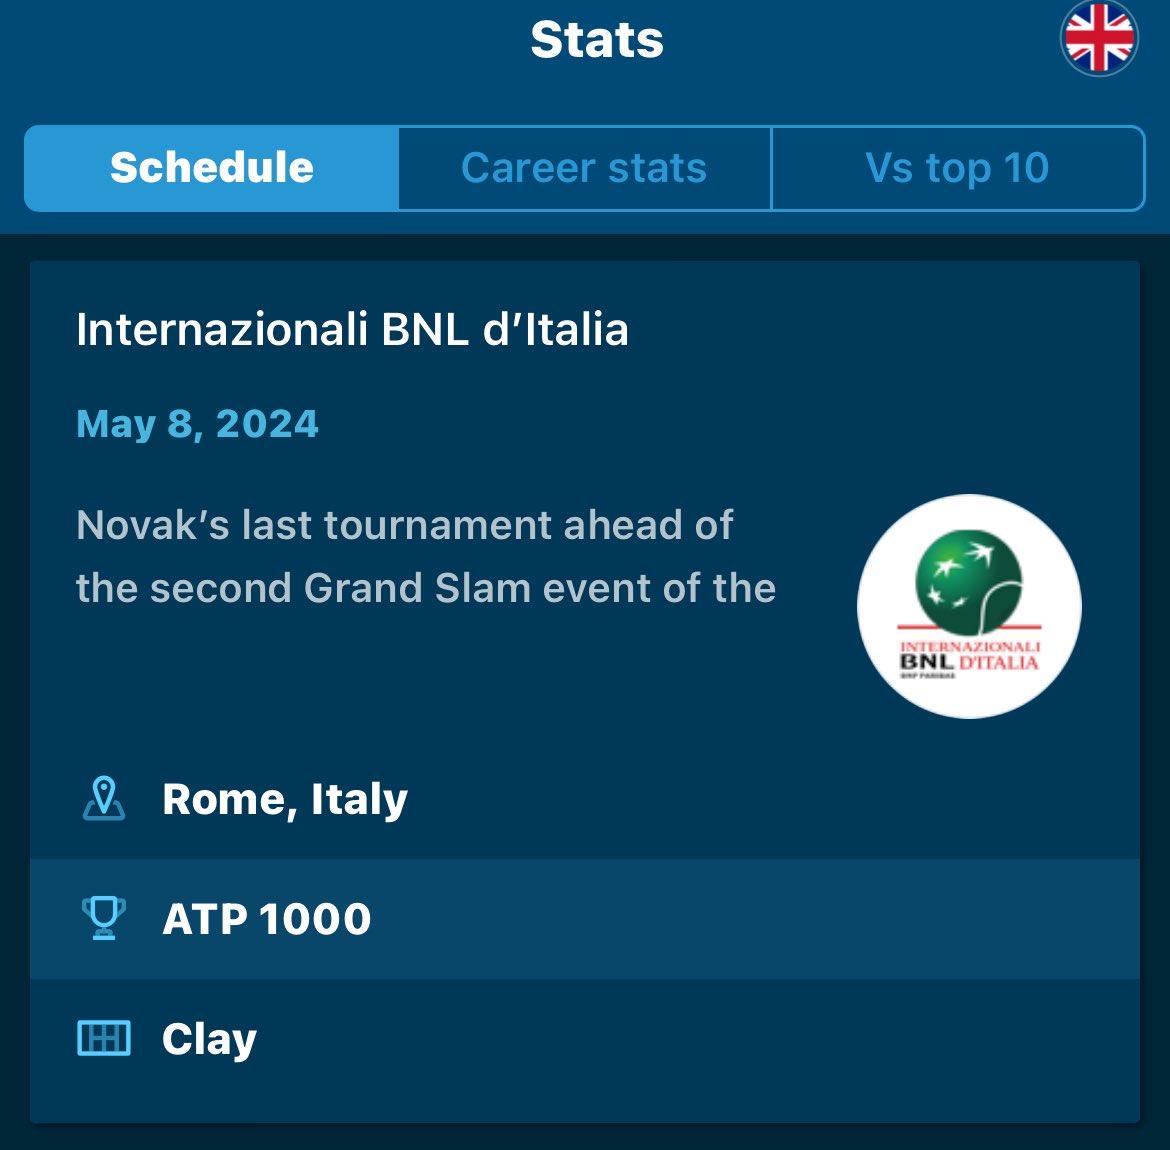 He told us in every way, now he has also updated his website😄
Novak will play at @InteBNLdItalia 
It should land in Rome today, late afternoon✈️🇮🇹 
Non vediamo l’ora❤️
Forzaaaaa, @DjokerNole 

#NoleFam #Roma #IBI24